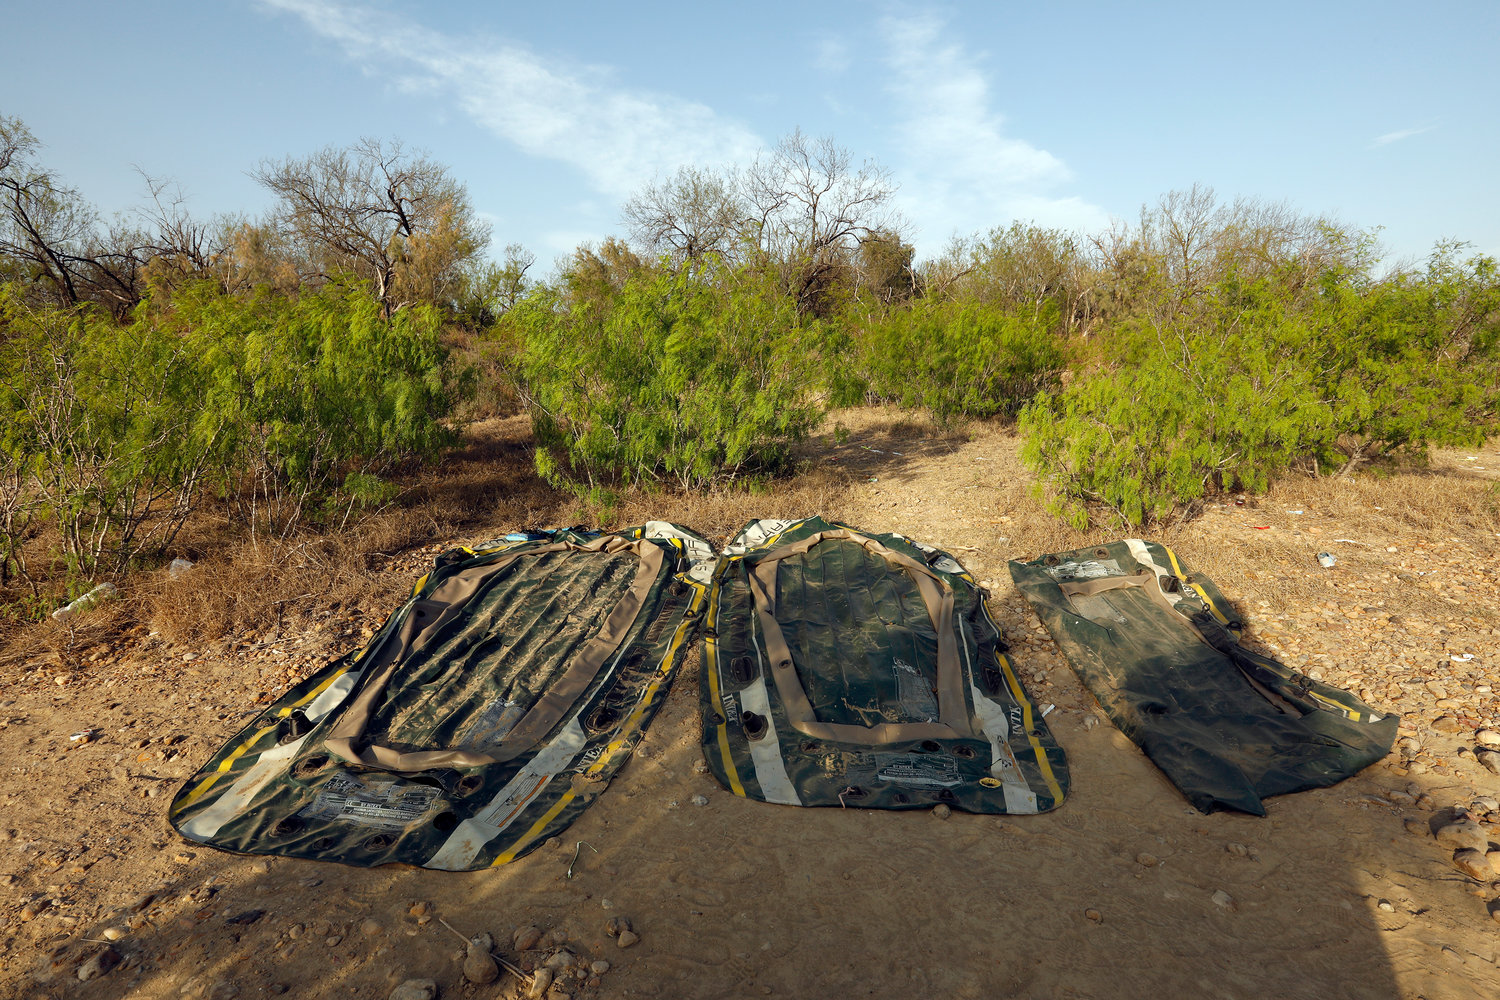 Three plastic rafts used by smugglers to get migrants across the Rio Grande River, later confiscated by Border Patrol agents, on March 22, 2021 in Roma, Texas. (Carolyn Cole/Los Angeles Times/TNS)